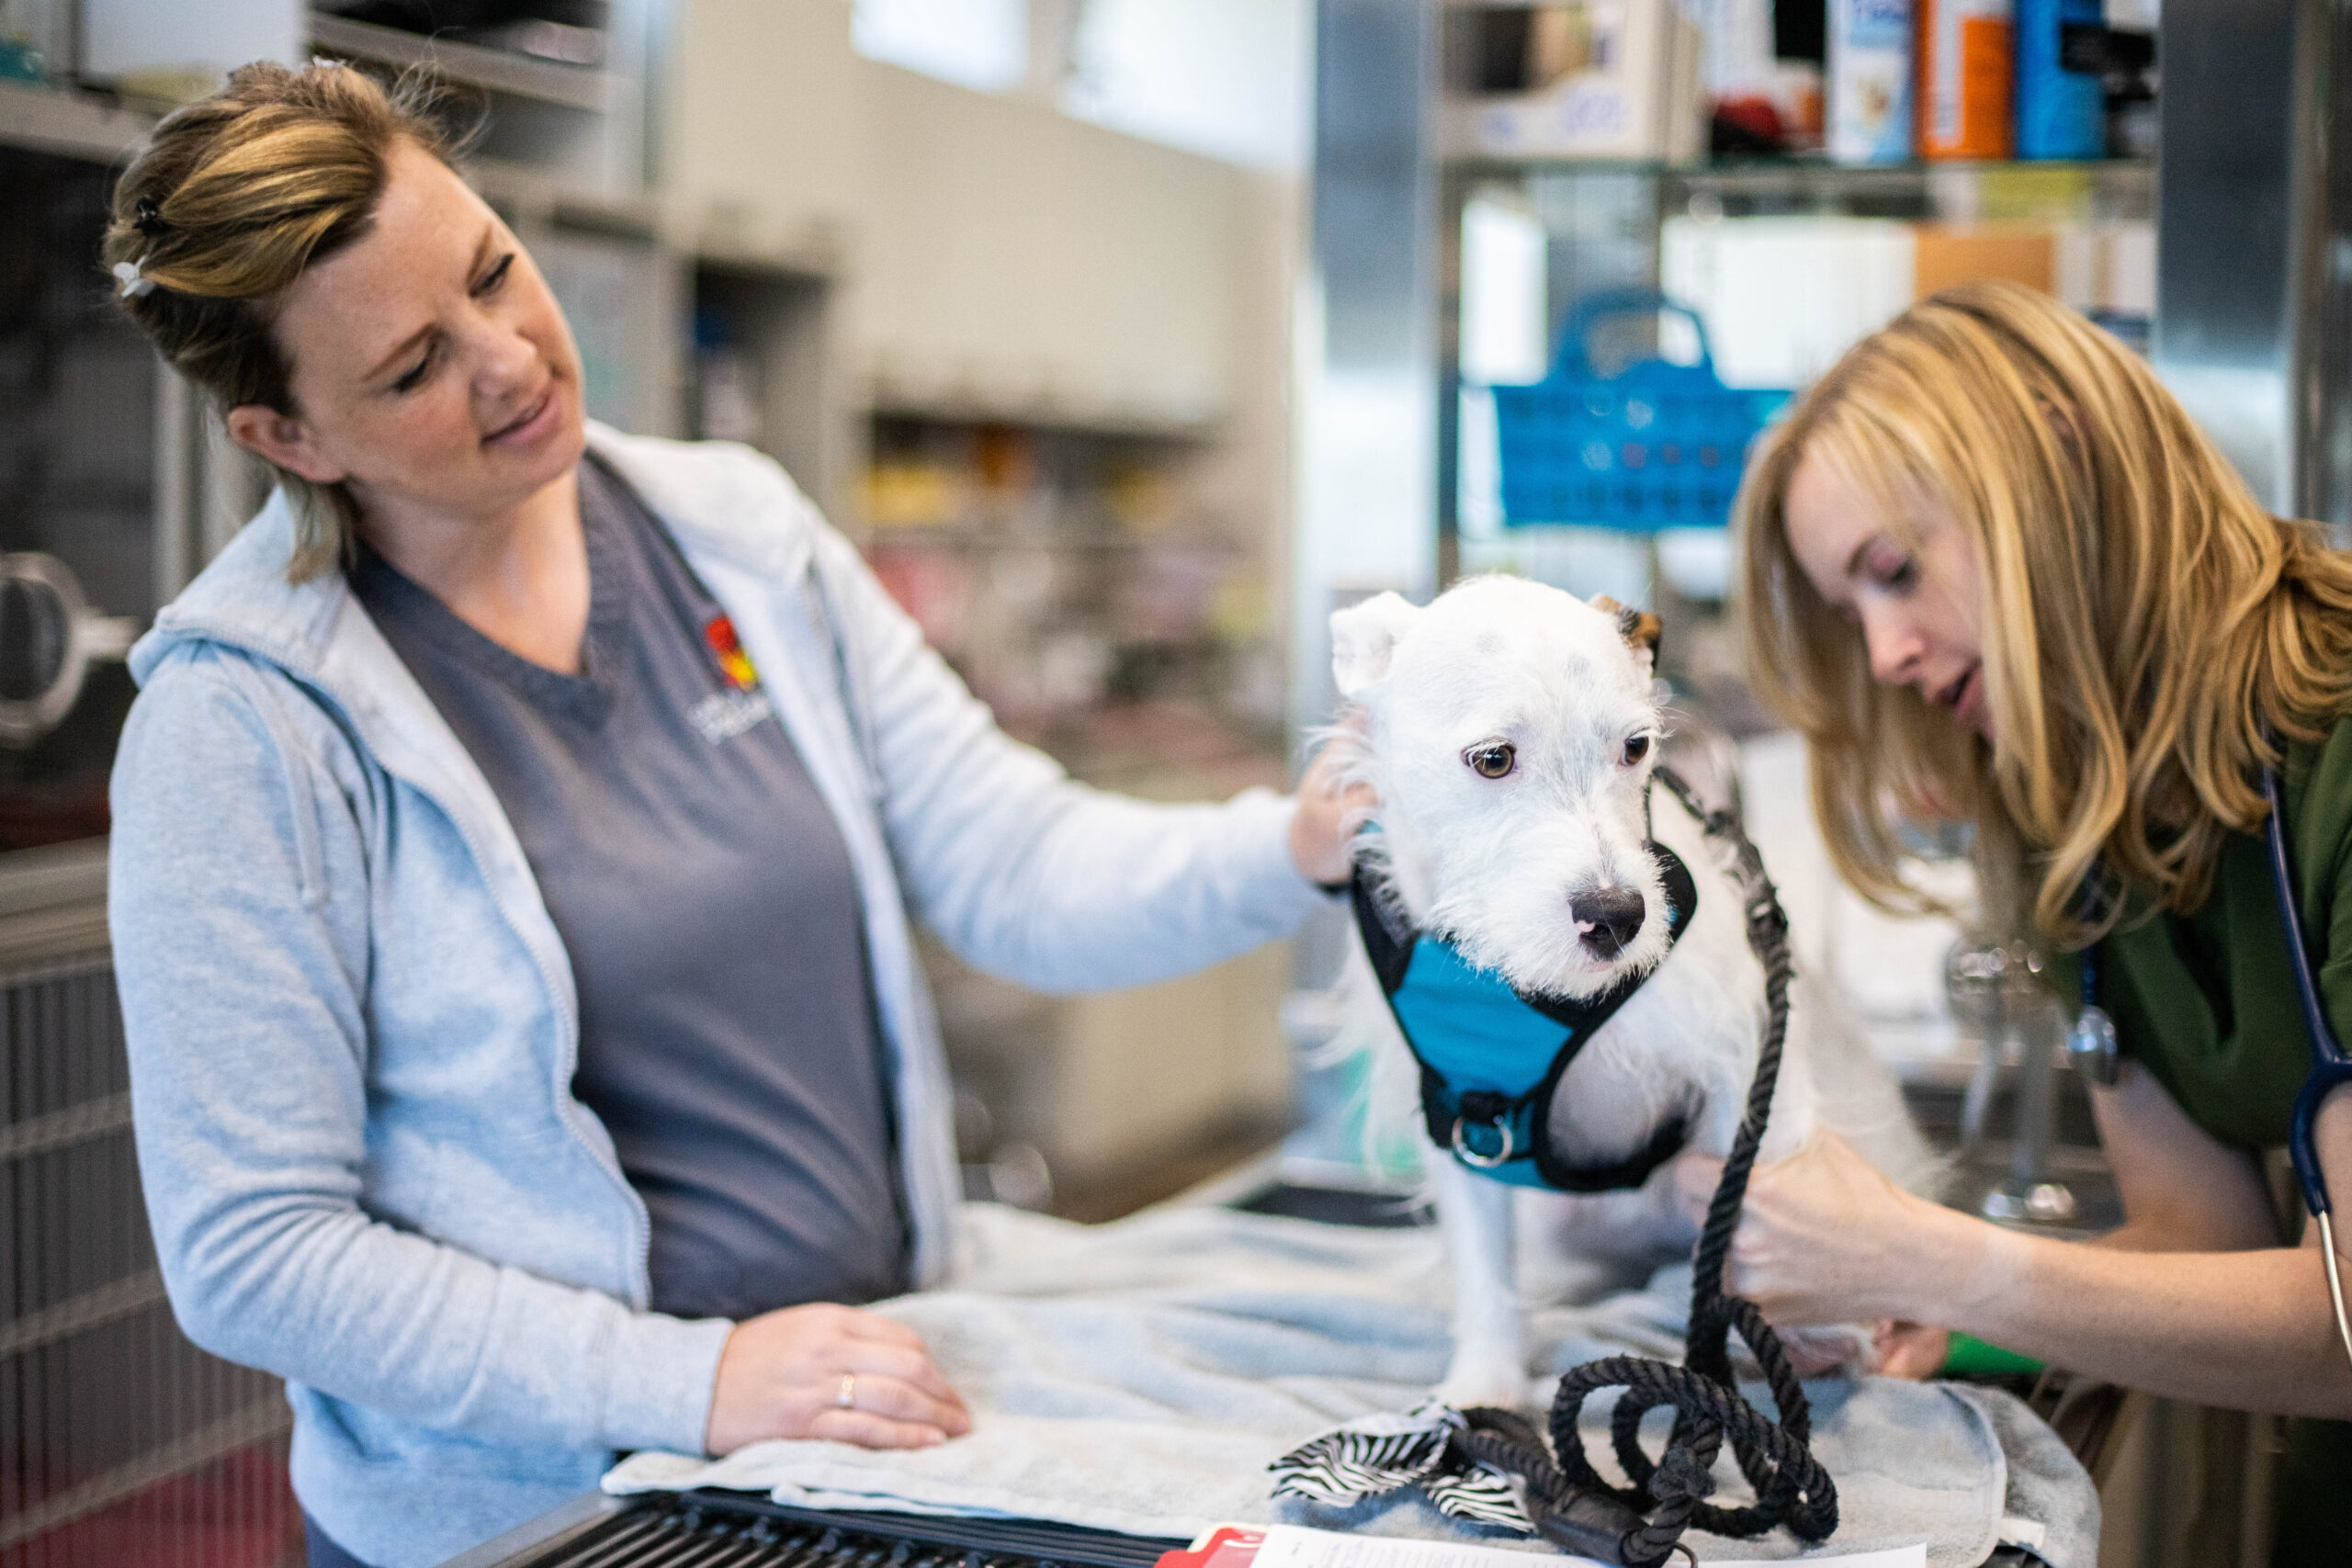 Veterinarian examining a dog while a veterinary tech assists